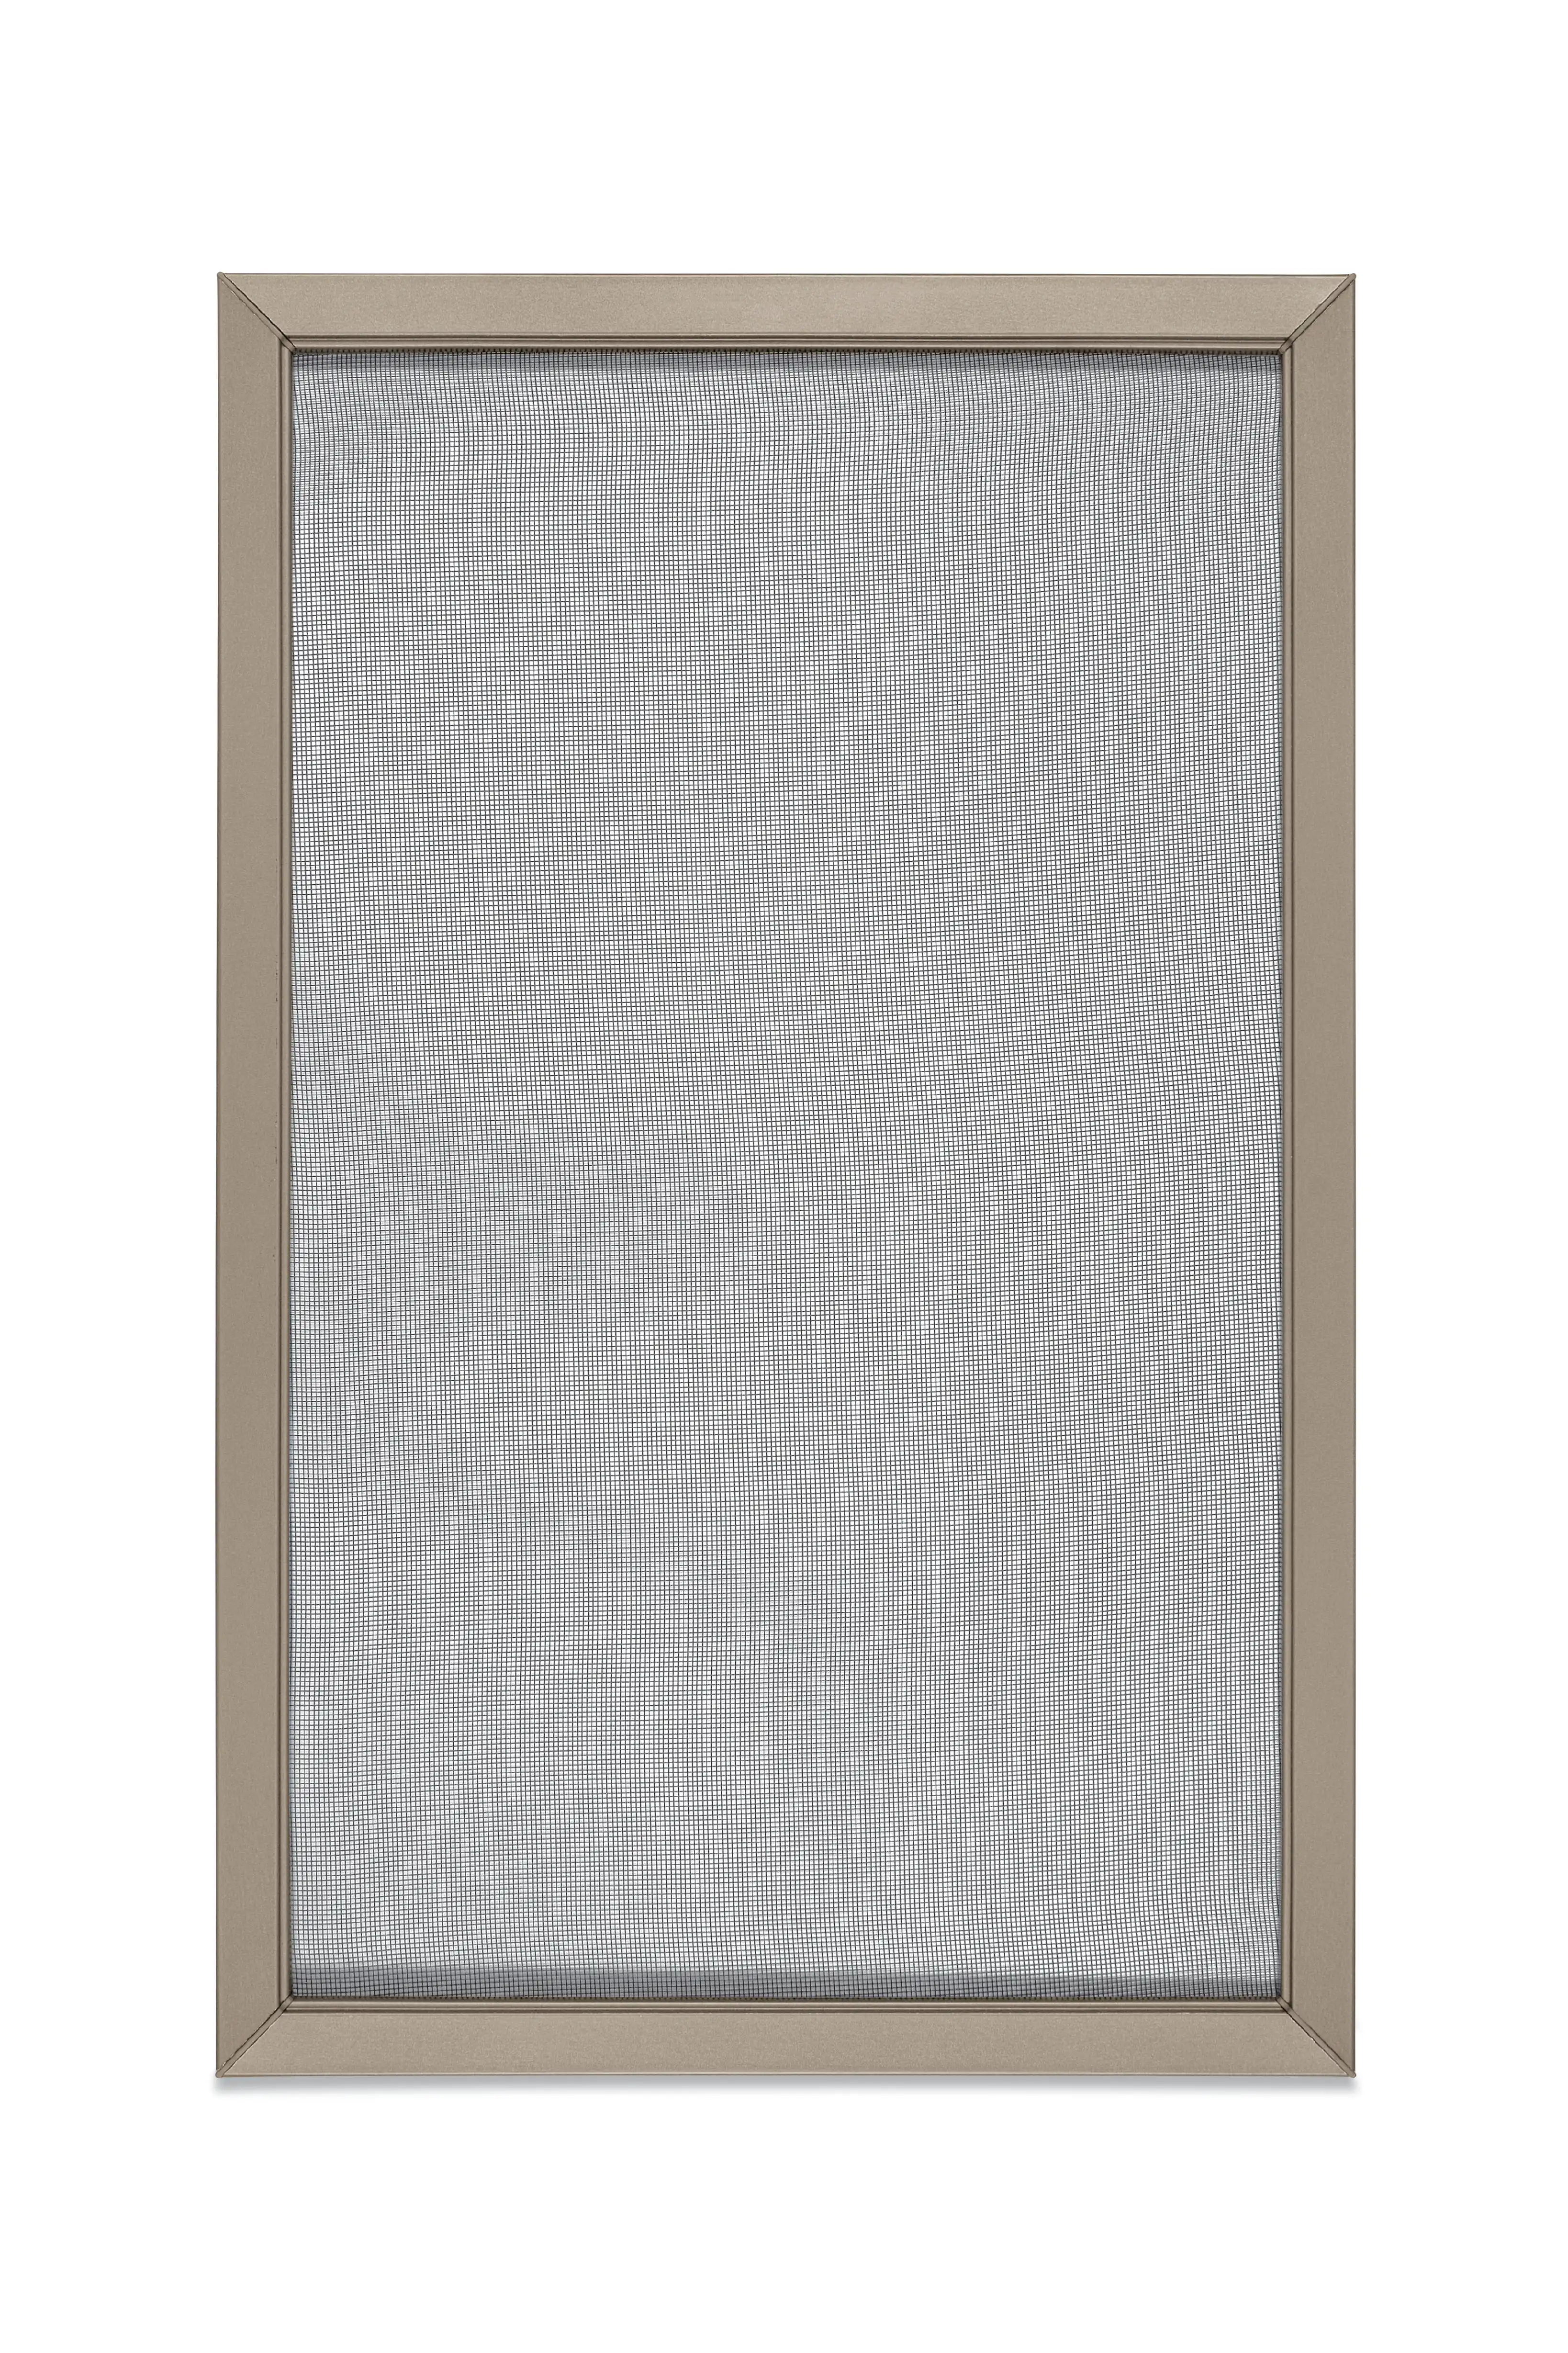 Image of a Marvin Replacement Hi Transparency window screen.